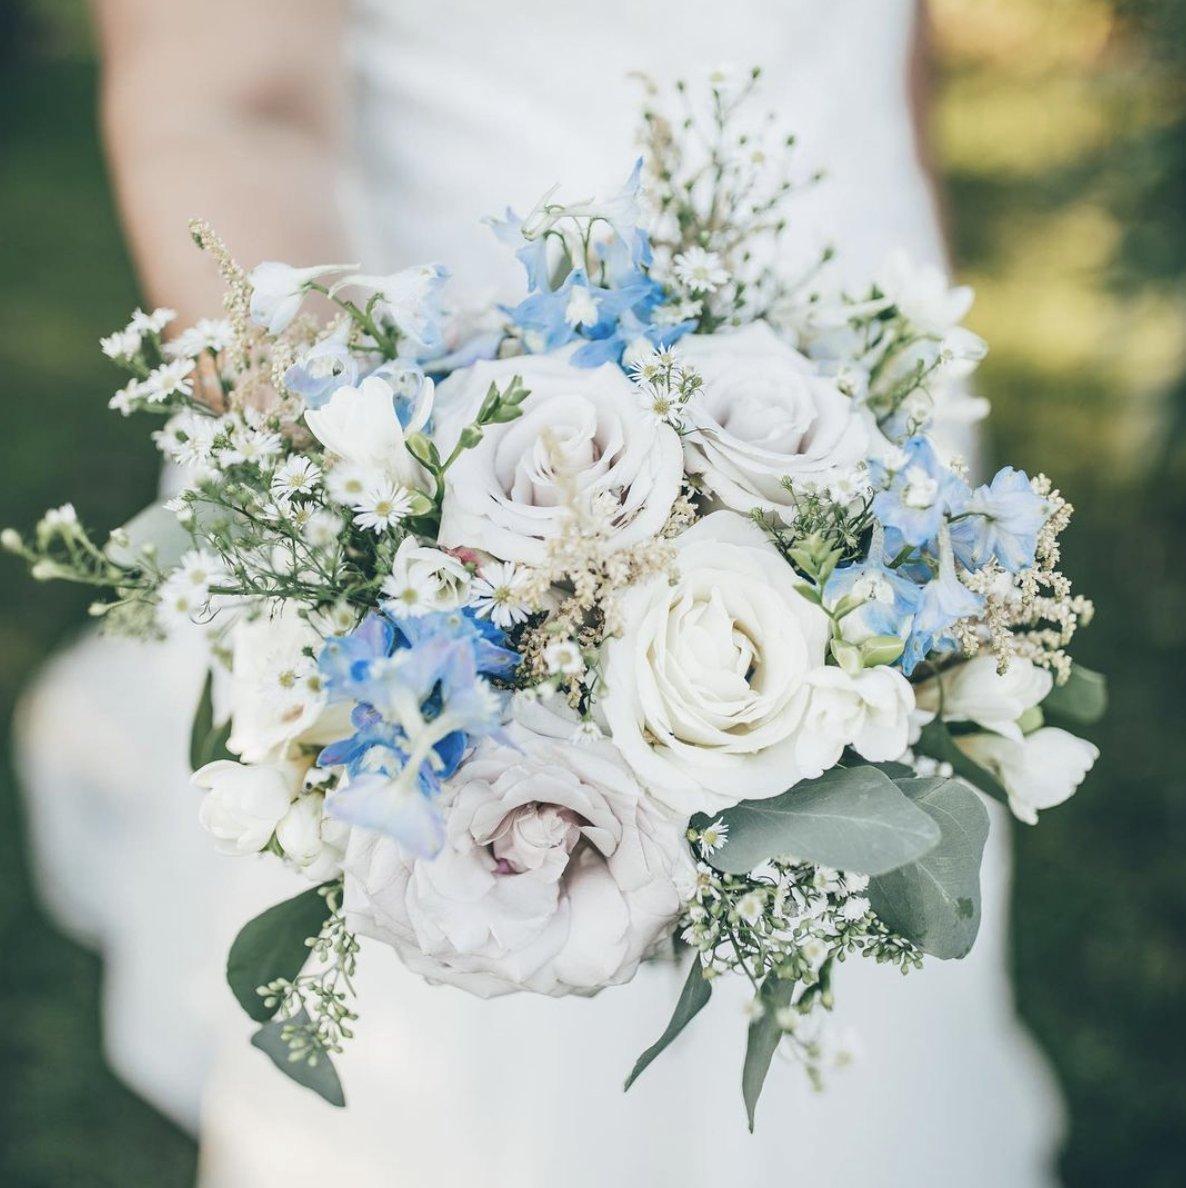 White bride in a white dress holding a blue and white bouquet in the foreground